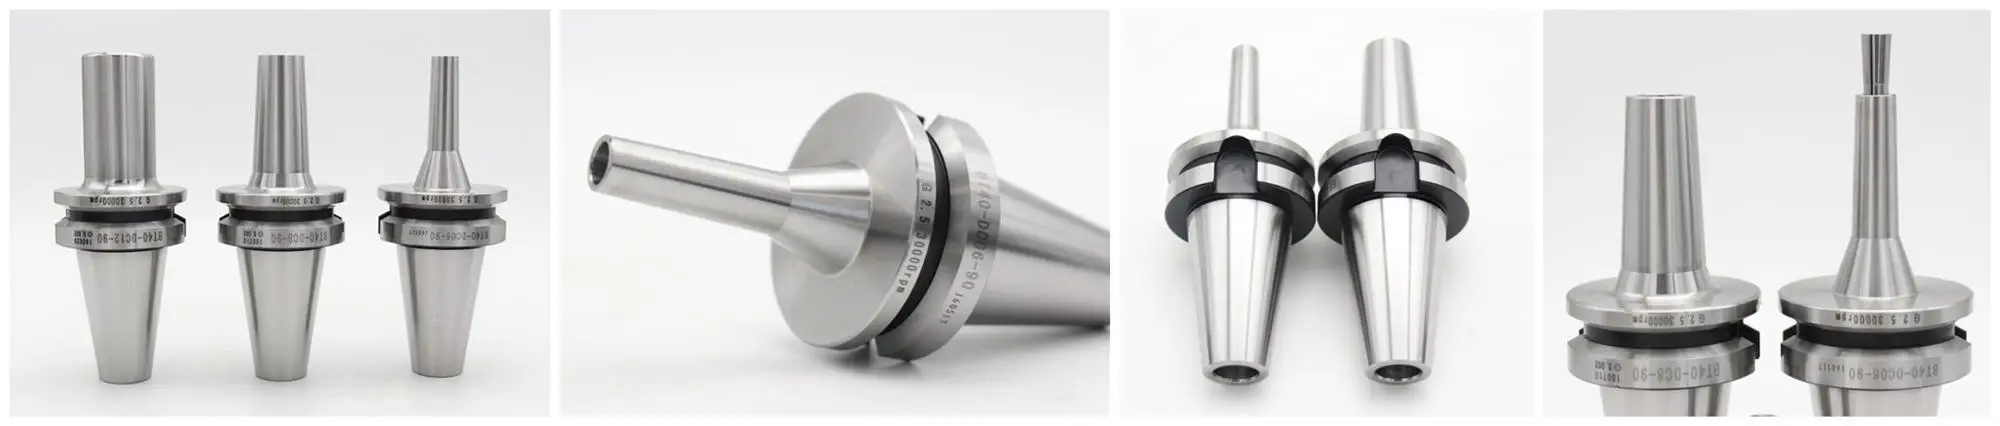 High precision rear pull handle BT30 BT40 collet holder DC06 DC08 DC10 high speed collet chucks tool holders